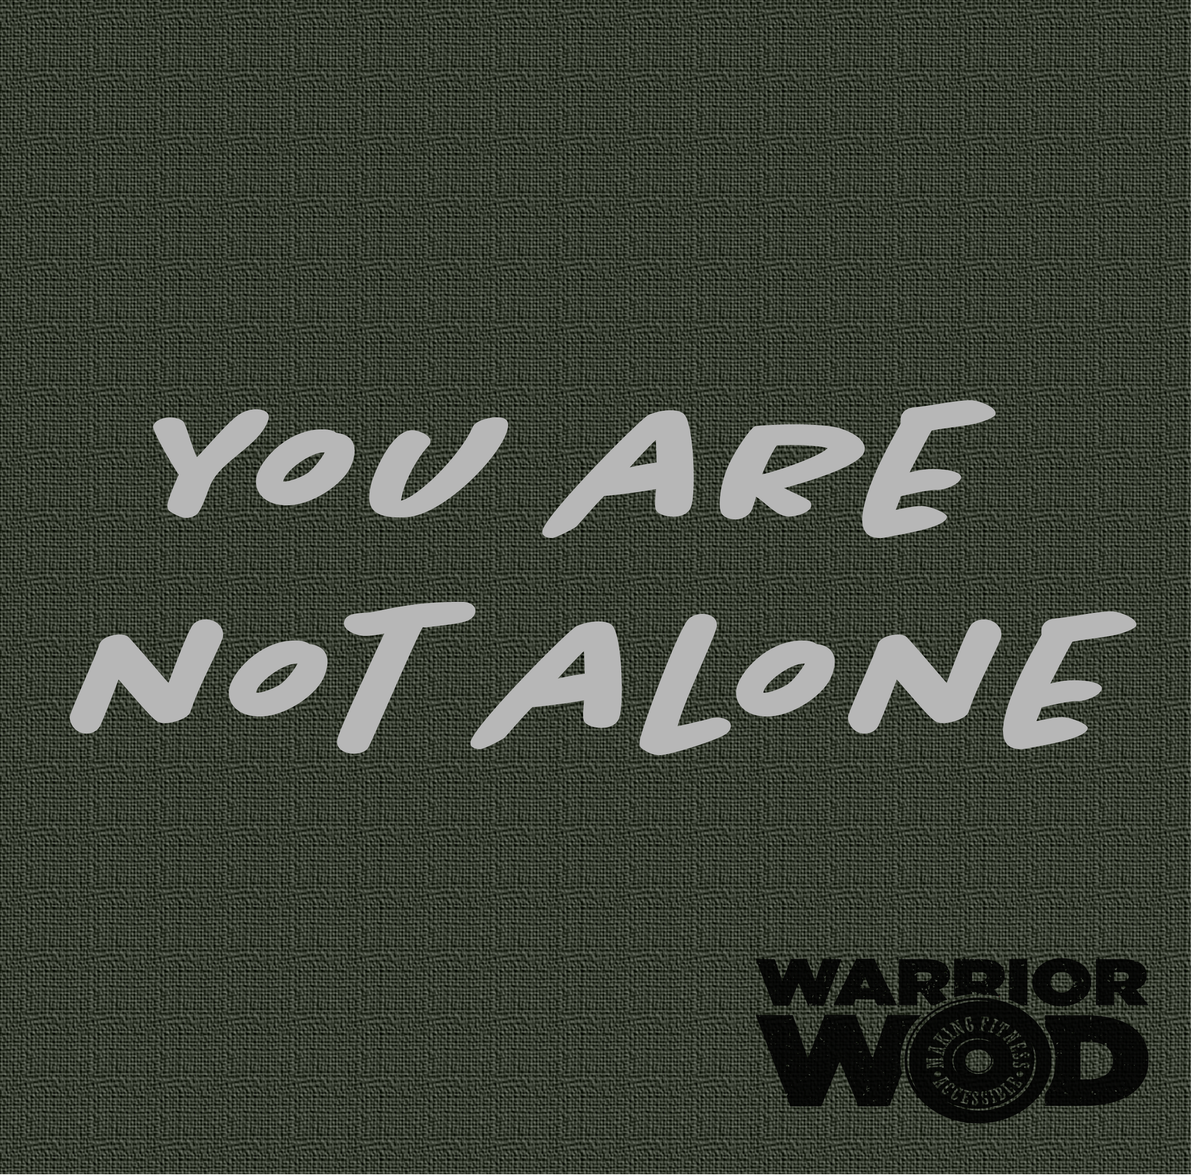 You are not alone

⁠
If you are struggling reach out to the⁠
Veteran Crisis 1-800-273-8255 then dial 1 or Text 838255. We also standby if you want to reach out to us.⁠
⁠
#nevergiveup #ptsd #veteranshealth #veterans #suicideprevention #SuicideAwareness #veteranfitness 
⁠

⁠